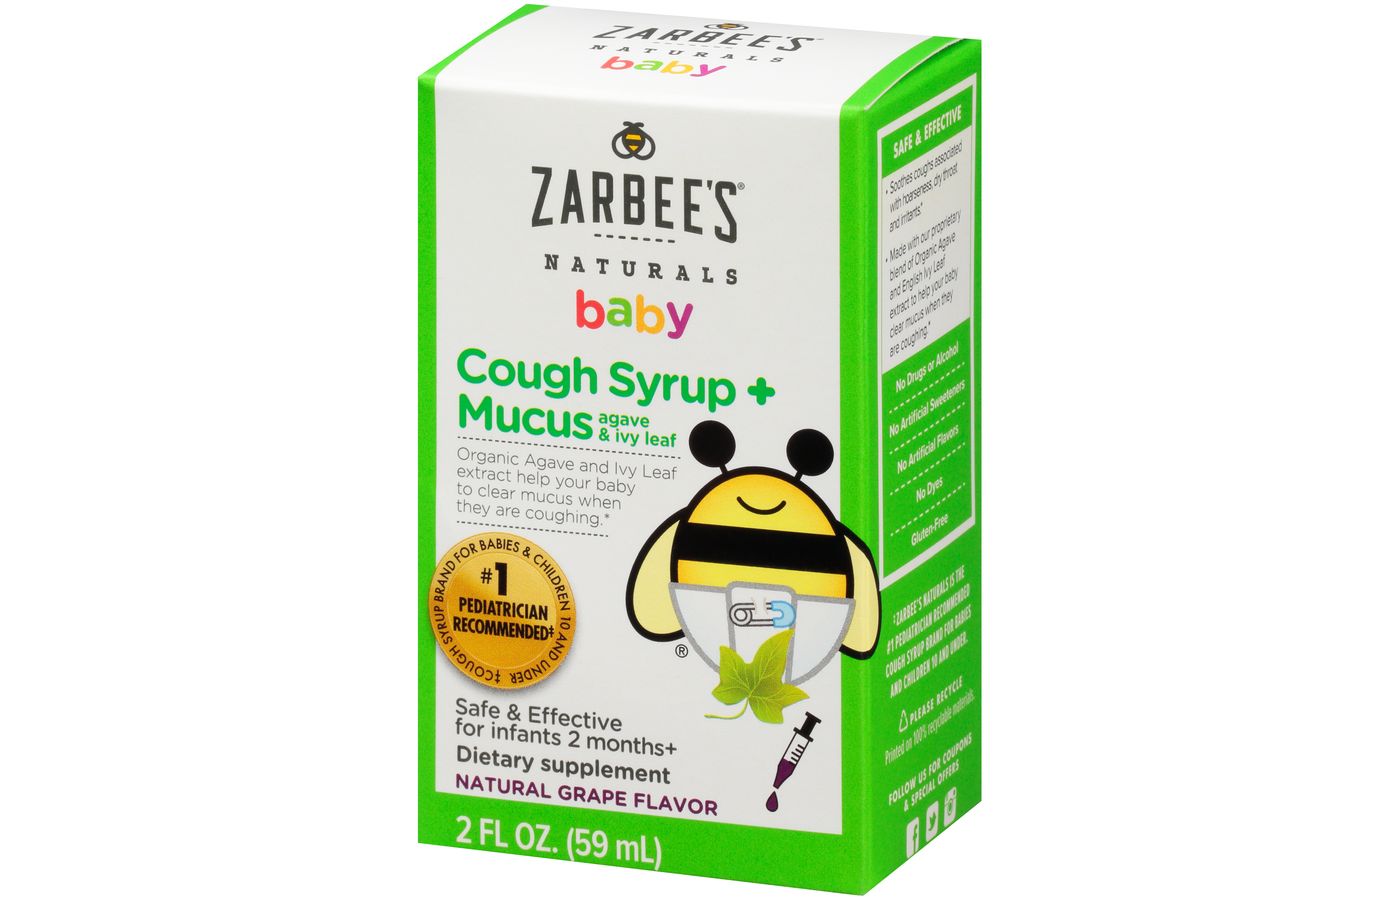 Zarbee's Naturals Baby Cough Syrup & Mucus Reducer Liquid - Grape - 2 fl oz - image 1 of 4